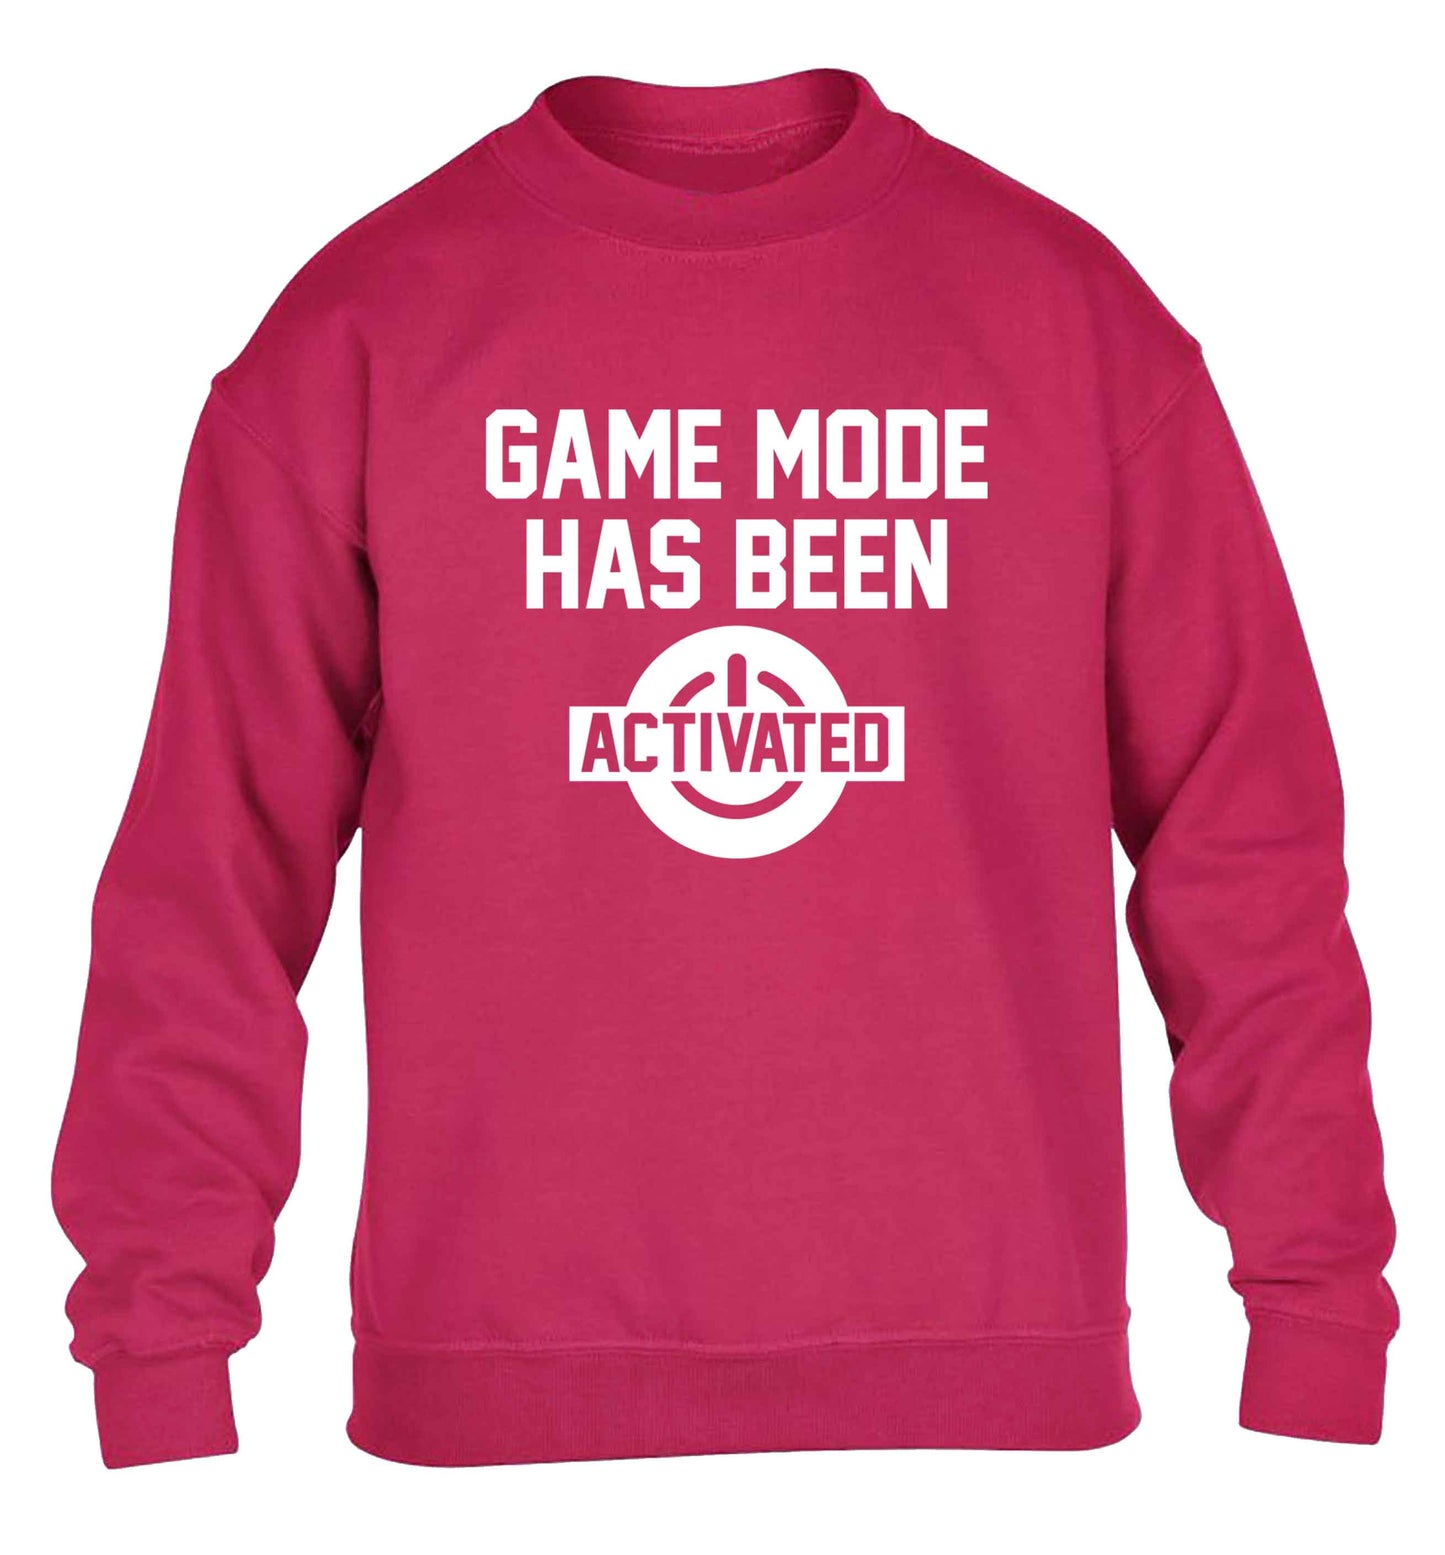 Game mode has been activated children's pink sweater 12-13 Years